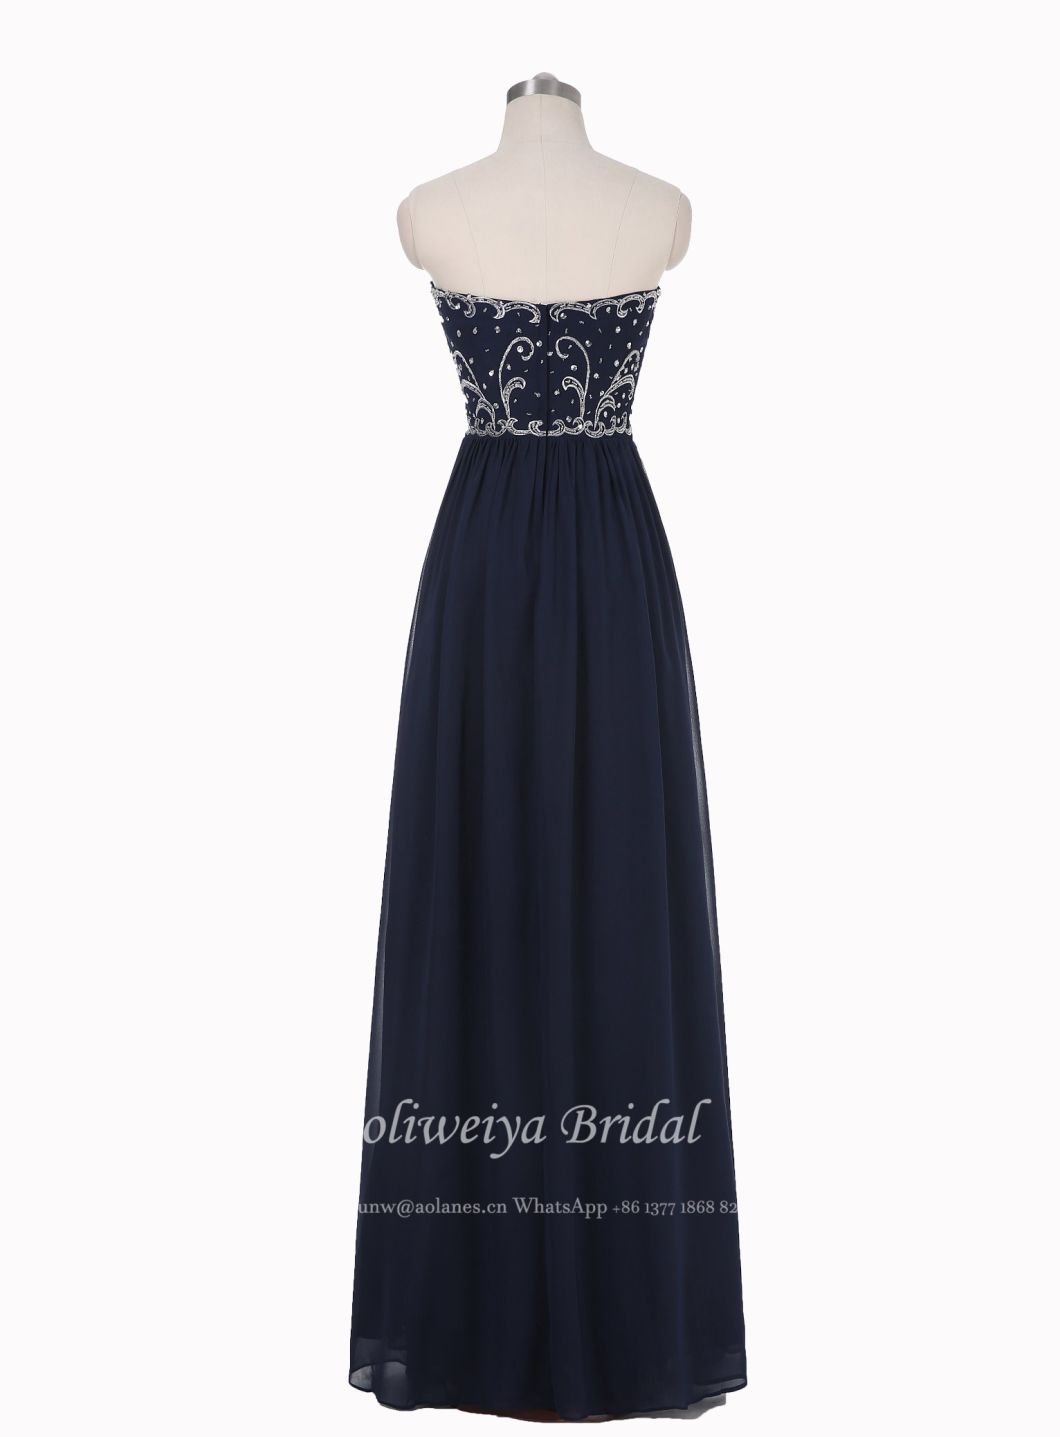 Aolanes embroidery Strapless Navy Evening Dress